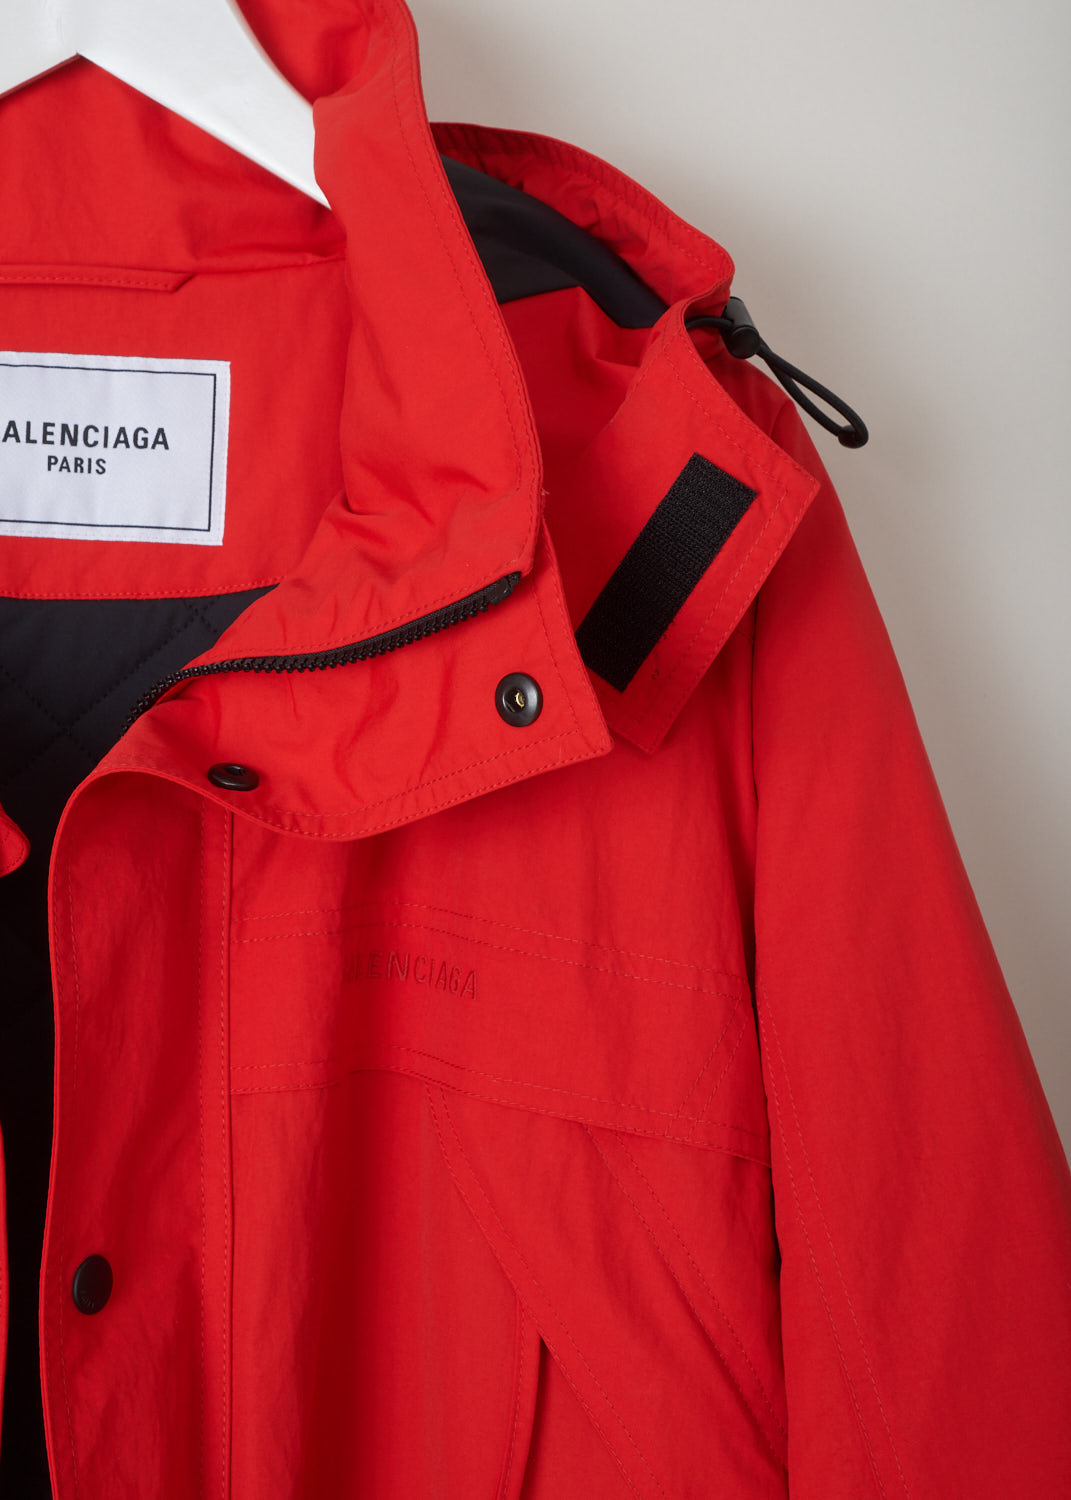 Balenciaga, Red parka model, 646774_TJ014_6400, red, detail1. Red oversized parka has lots of features beginning with the hood which is lined and detachable with press buttons. Going down this model has 4 pockets 2 on chest height 2 below that, with al the pockets being forward slanted. There is a cord tunnel on the inside with which the width of the waist can be adjusted. The fun part of this parka is the zipper which starts from the sides going up to the armpit and ending on the sleeves. Comes with zip fastening 